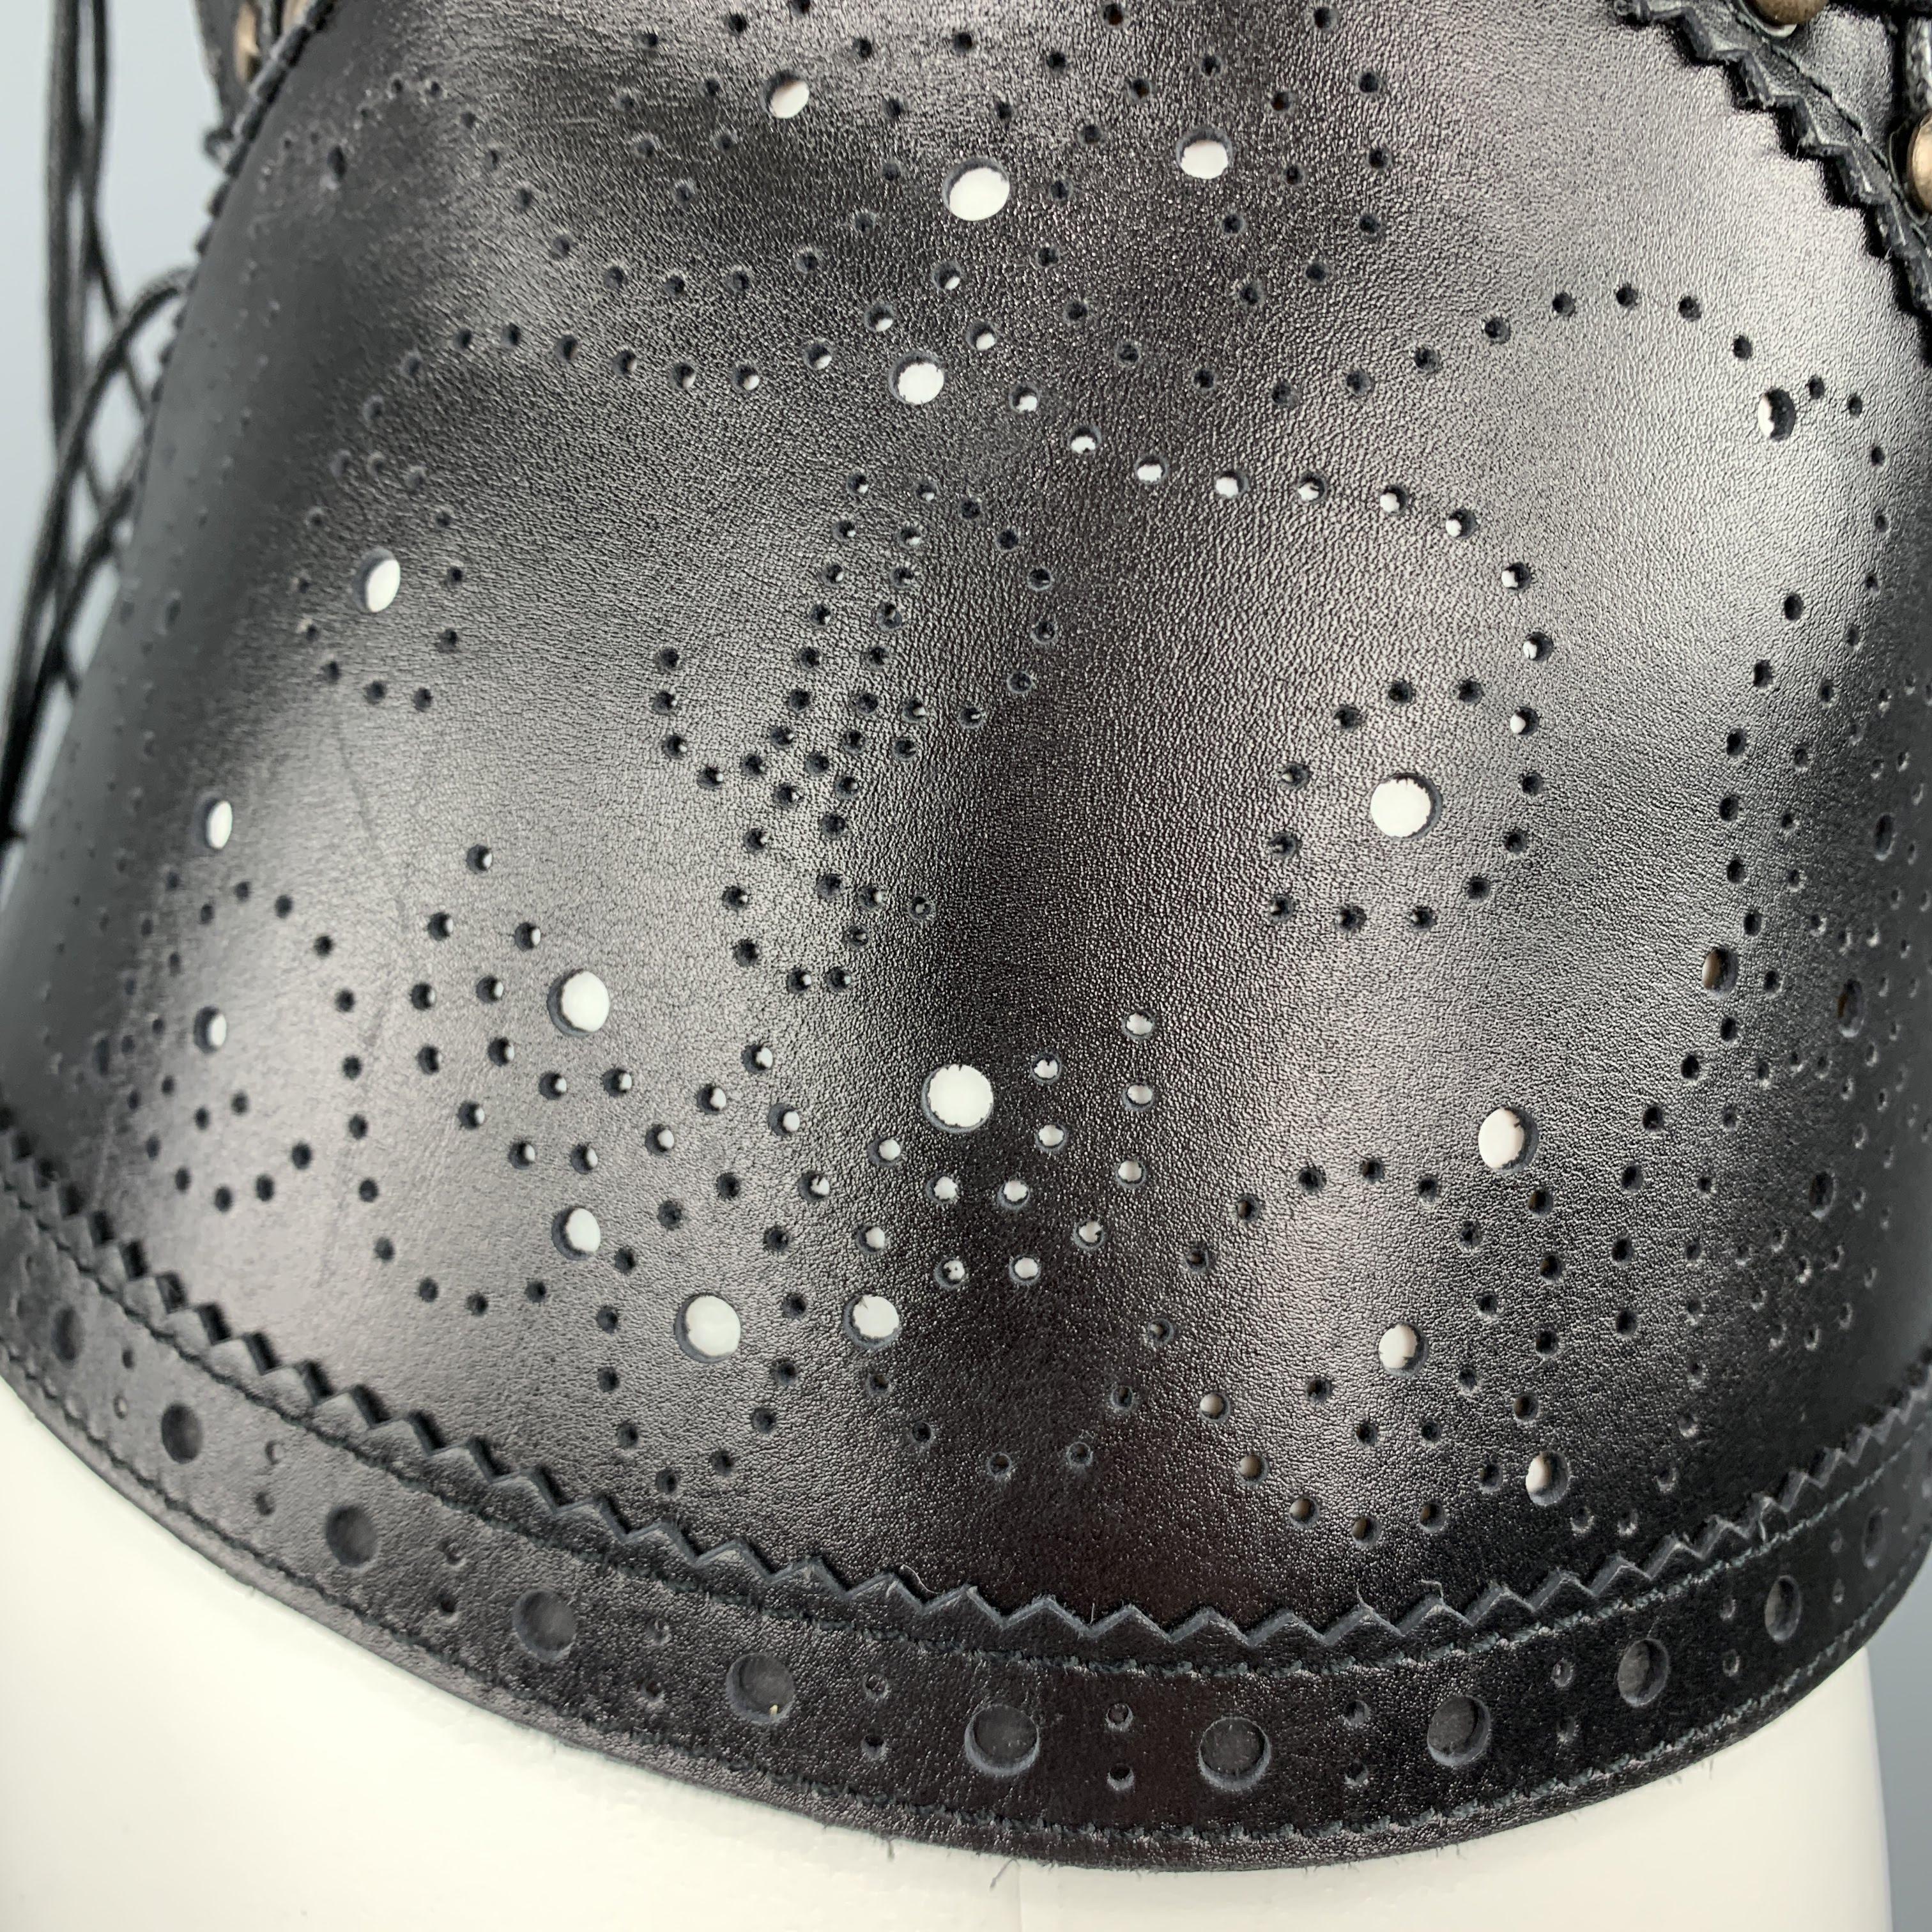 Women's JEAN PAUL GAULTIER Black Leather Perforated Lace Up Whip Stitch Corset Belt